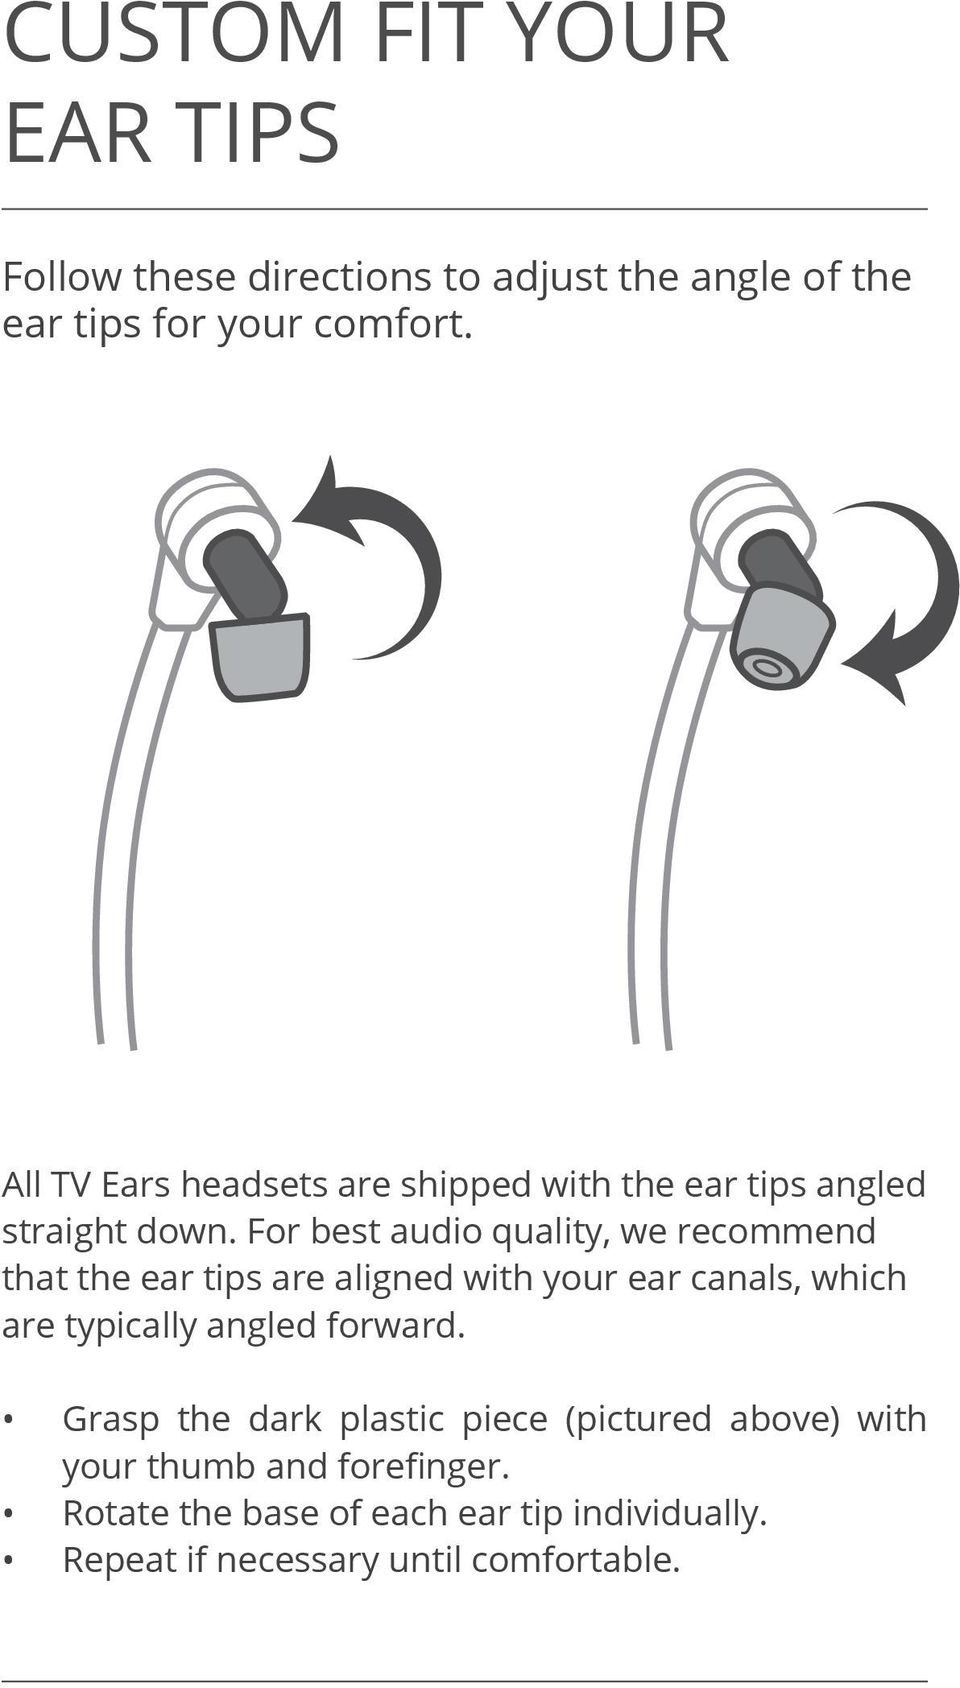 For best audio quality, we recommend that the ear tips are aligned with your ear canals, which are typically angled